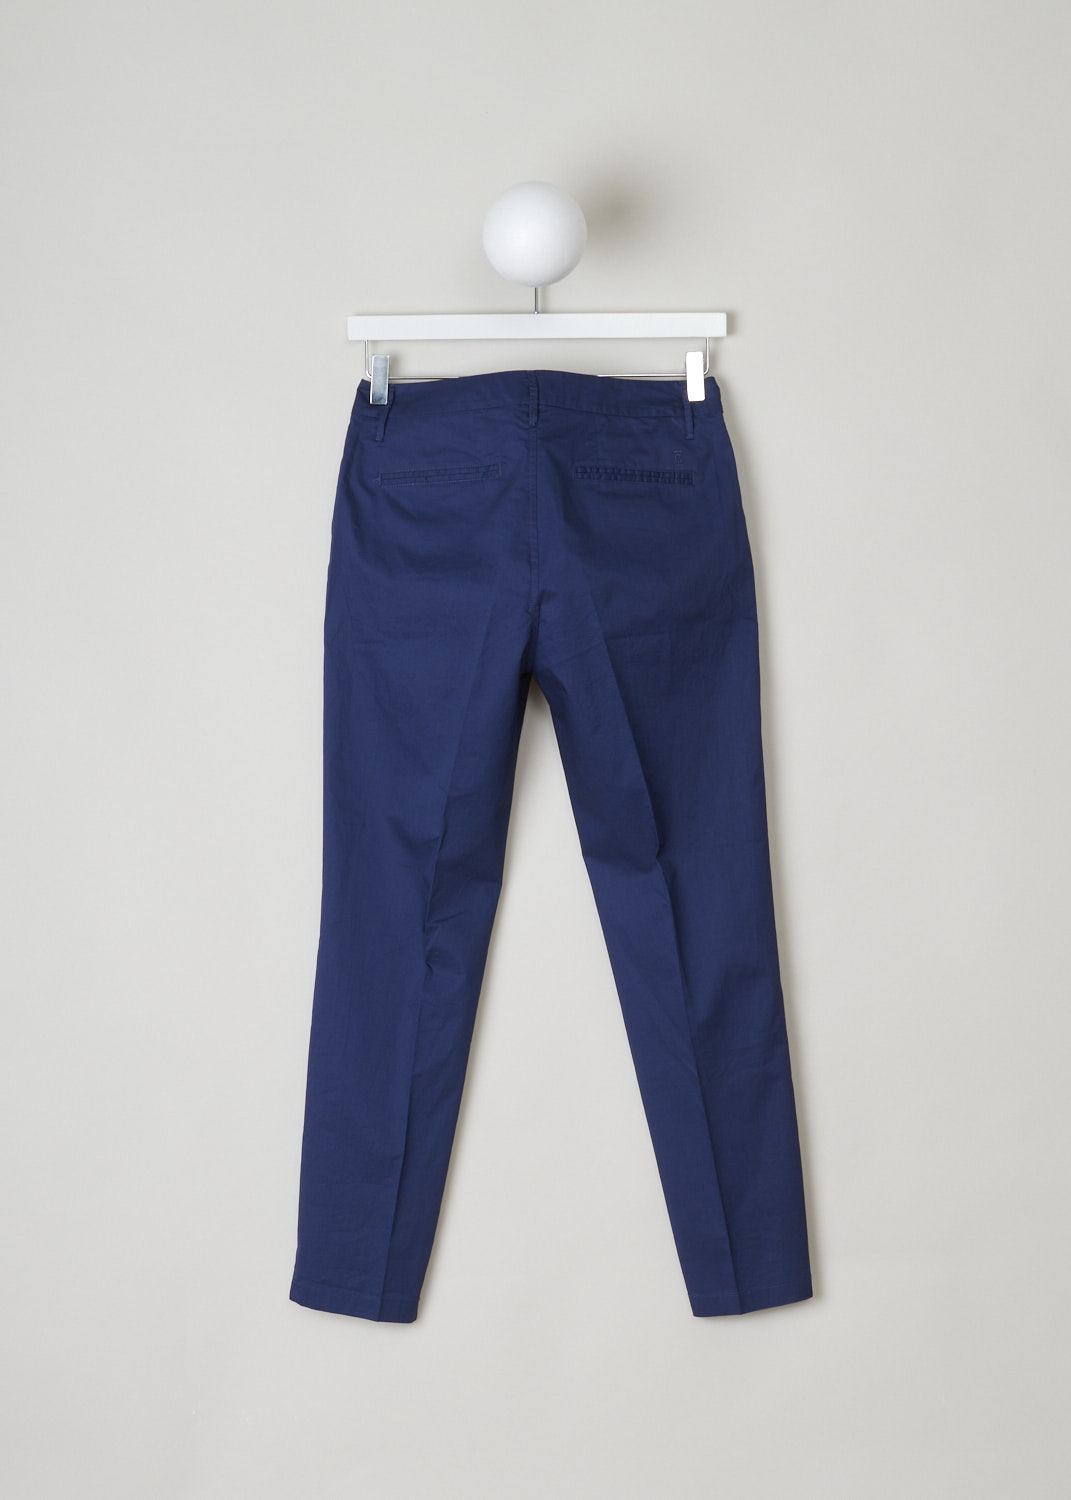 Closed, Indigo blue chino, jack_C91012_25E_22_558, blue, back, Flat front chino made solely out of cotton and coloured to a lovely shade of indigo blue. Four pockets in total with two forward slanted pockets on the front, and two welt pockets on the backside.  